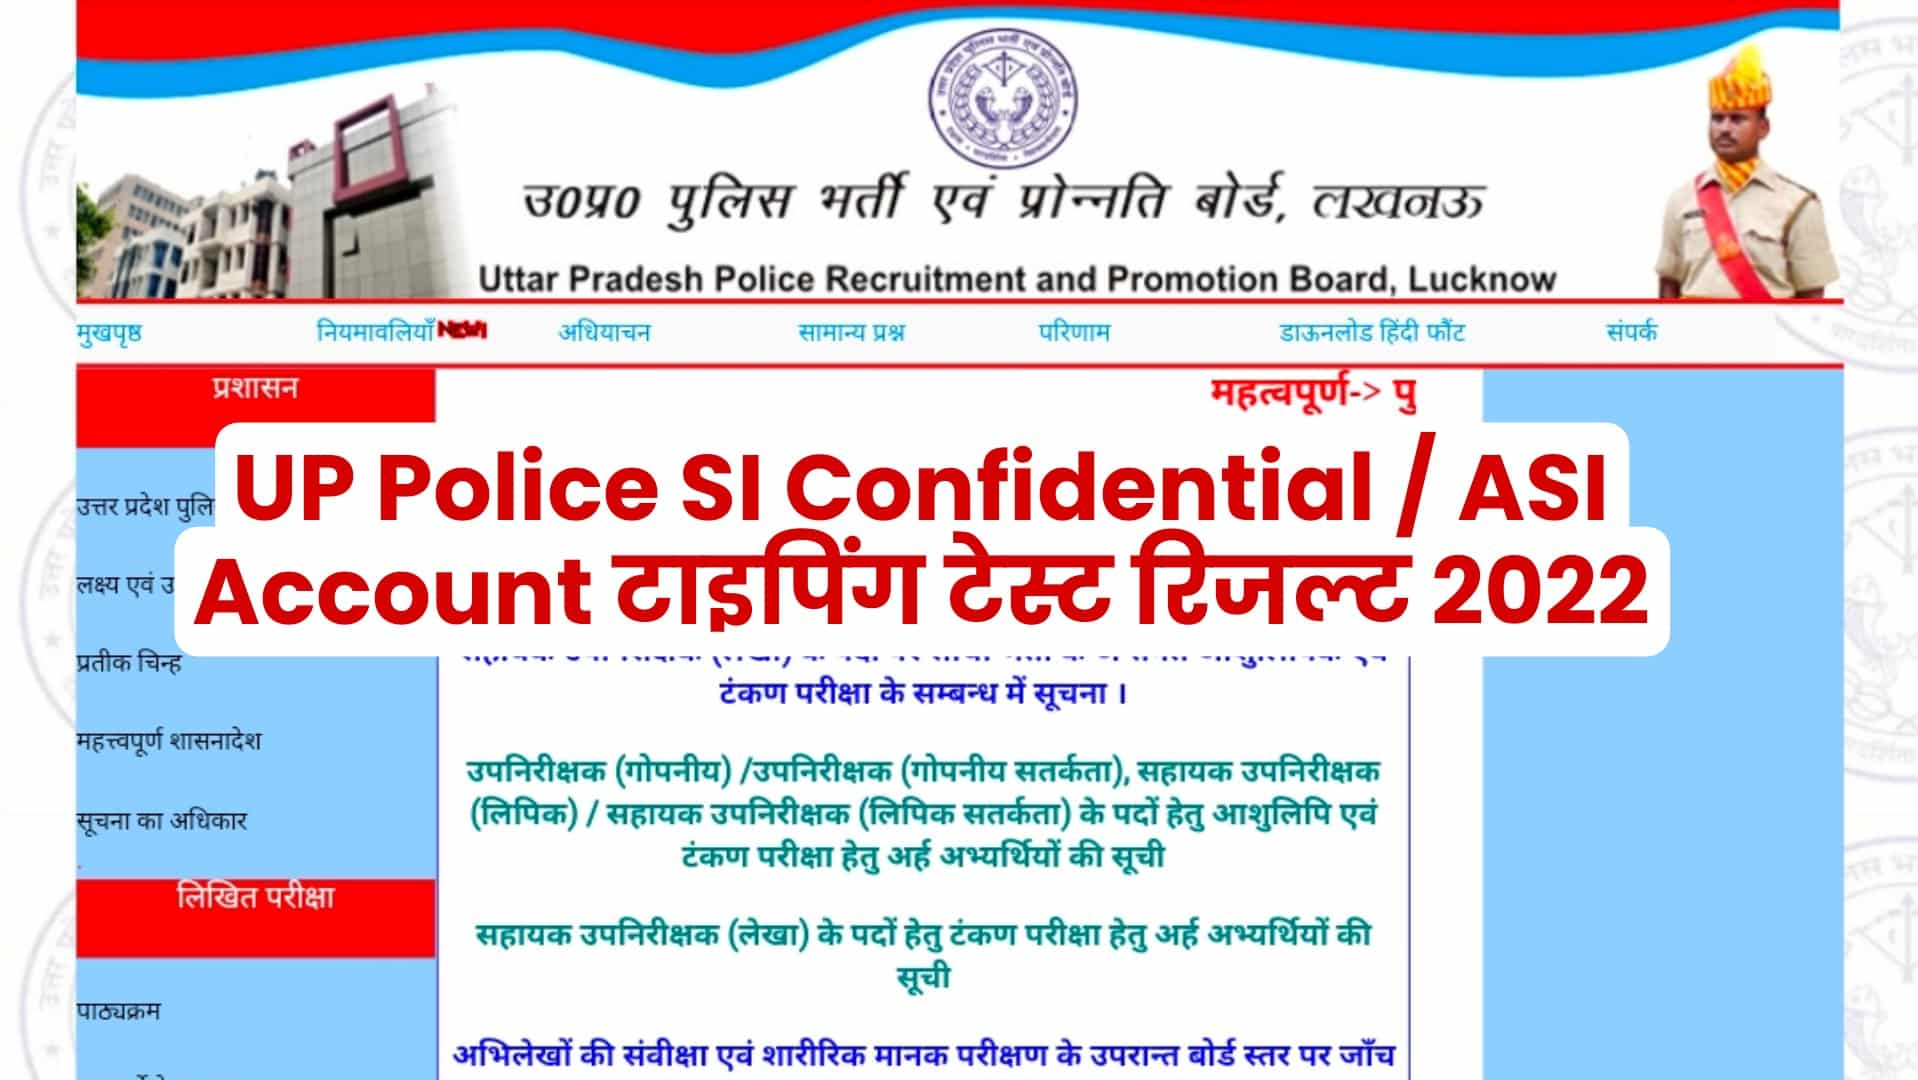 UP Police SI Confidential / ASI Account Result 2022